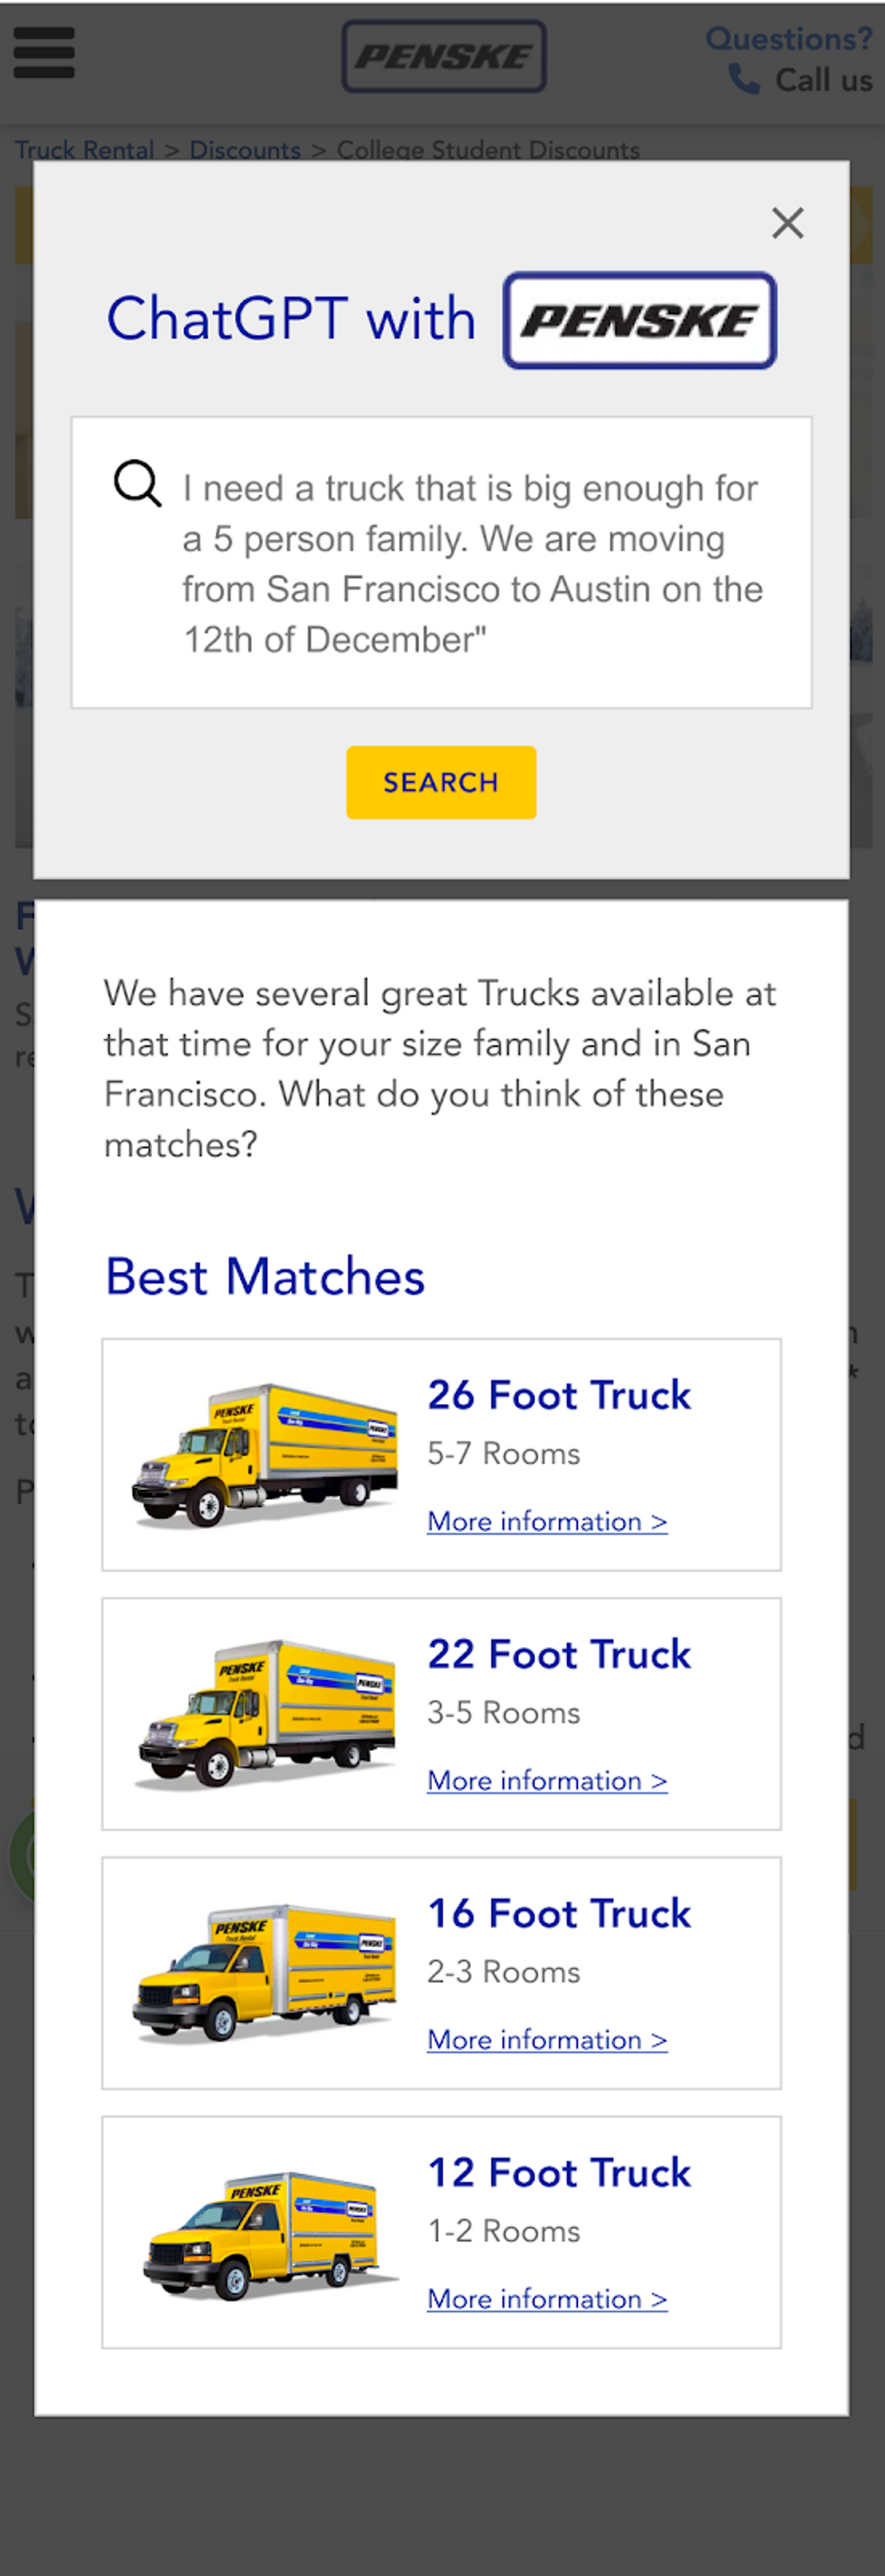 RebelMouse's ChatGPT integration can be used for smart search, like when looking for a specific kind of truck on Penske's website